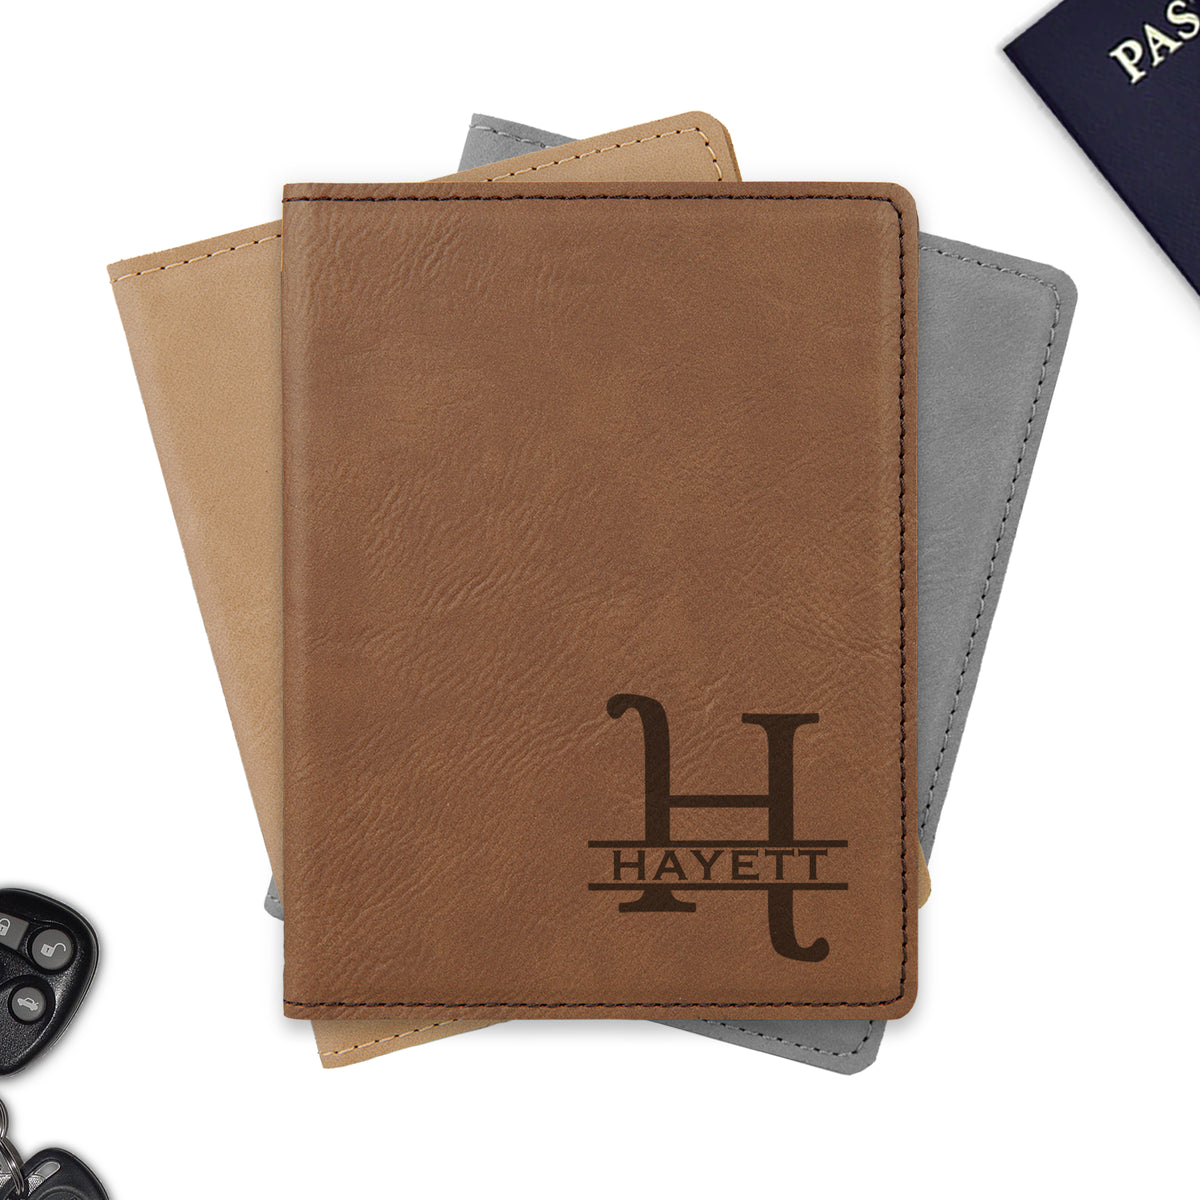 Personalized passport holder, engraved leather passport holder, leather passport cover / Laser engraved